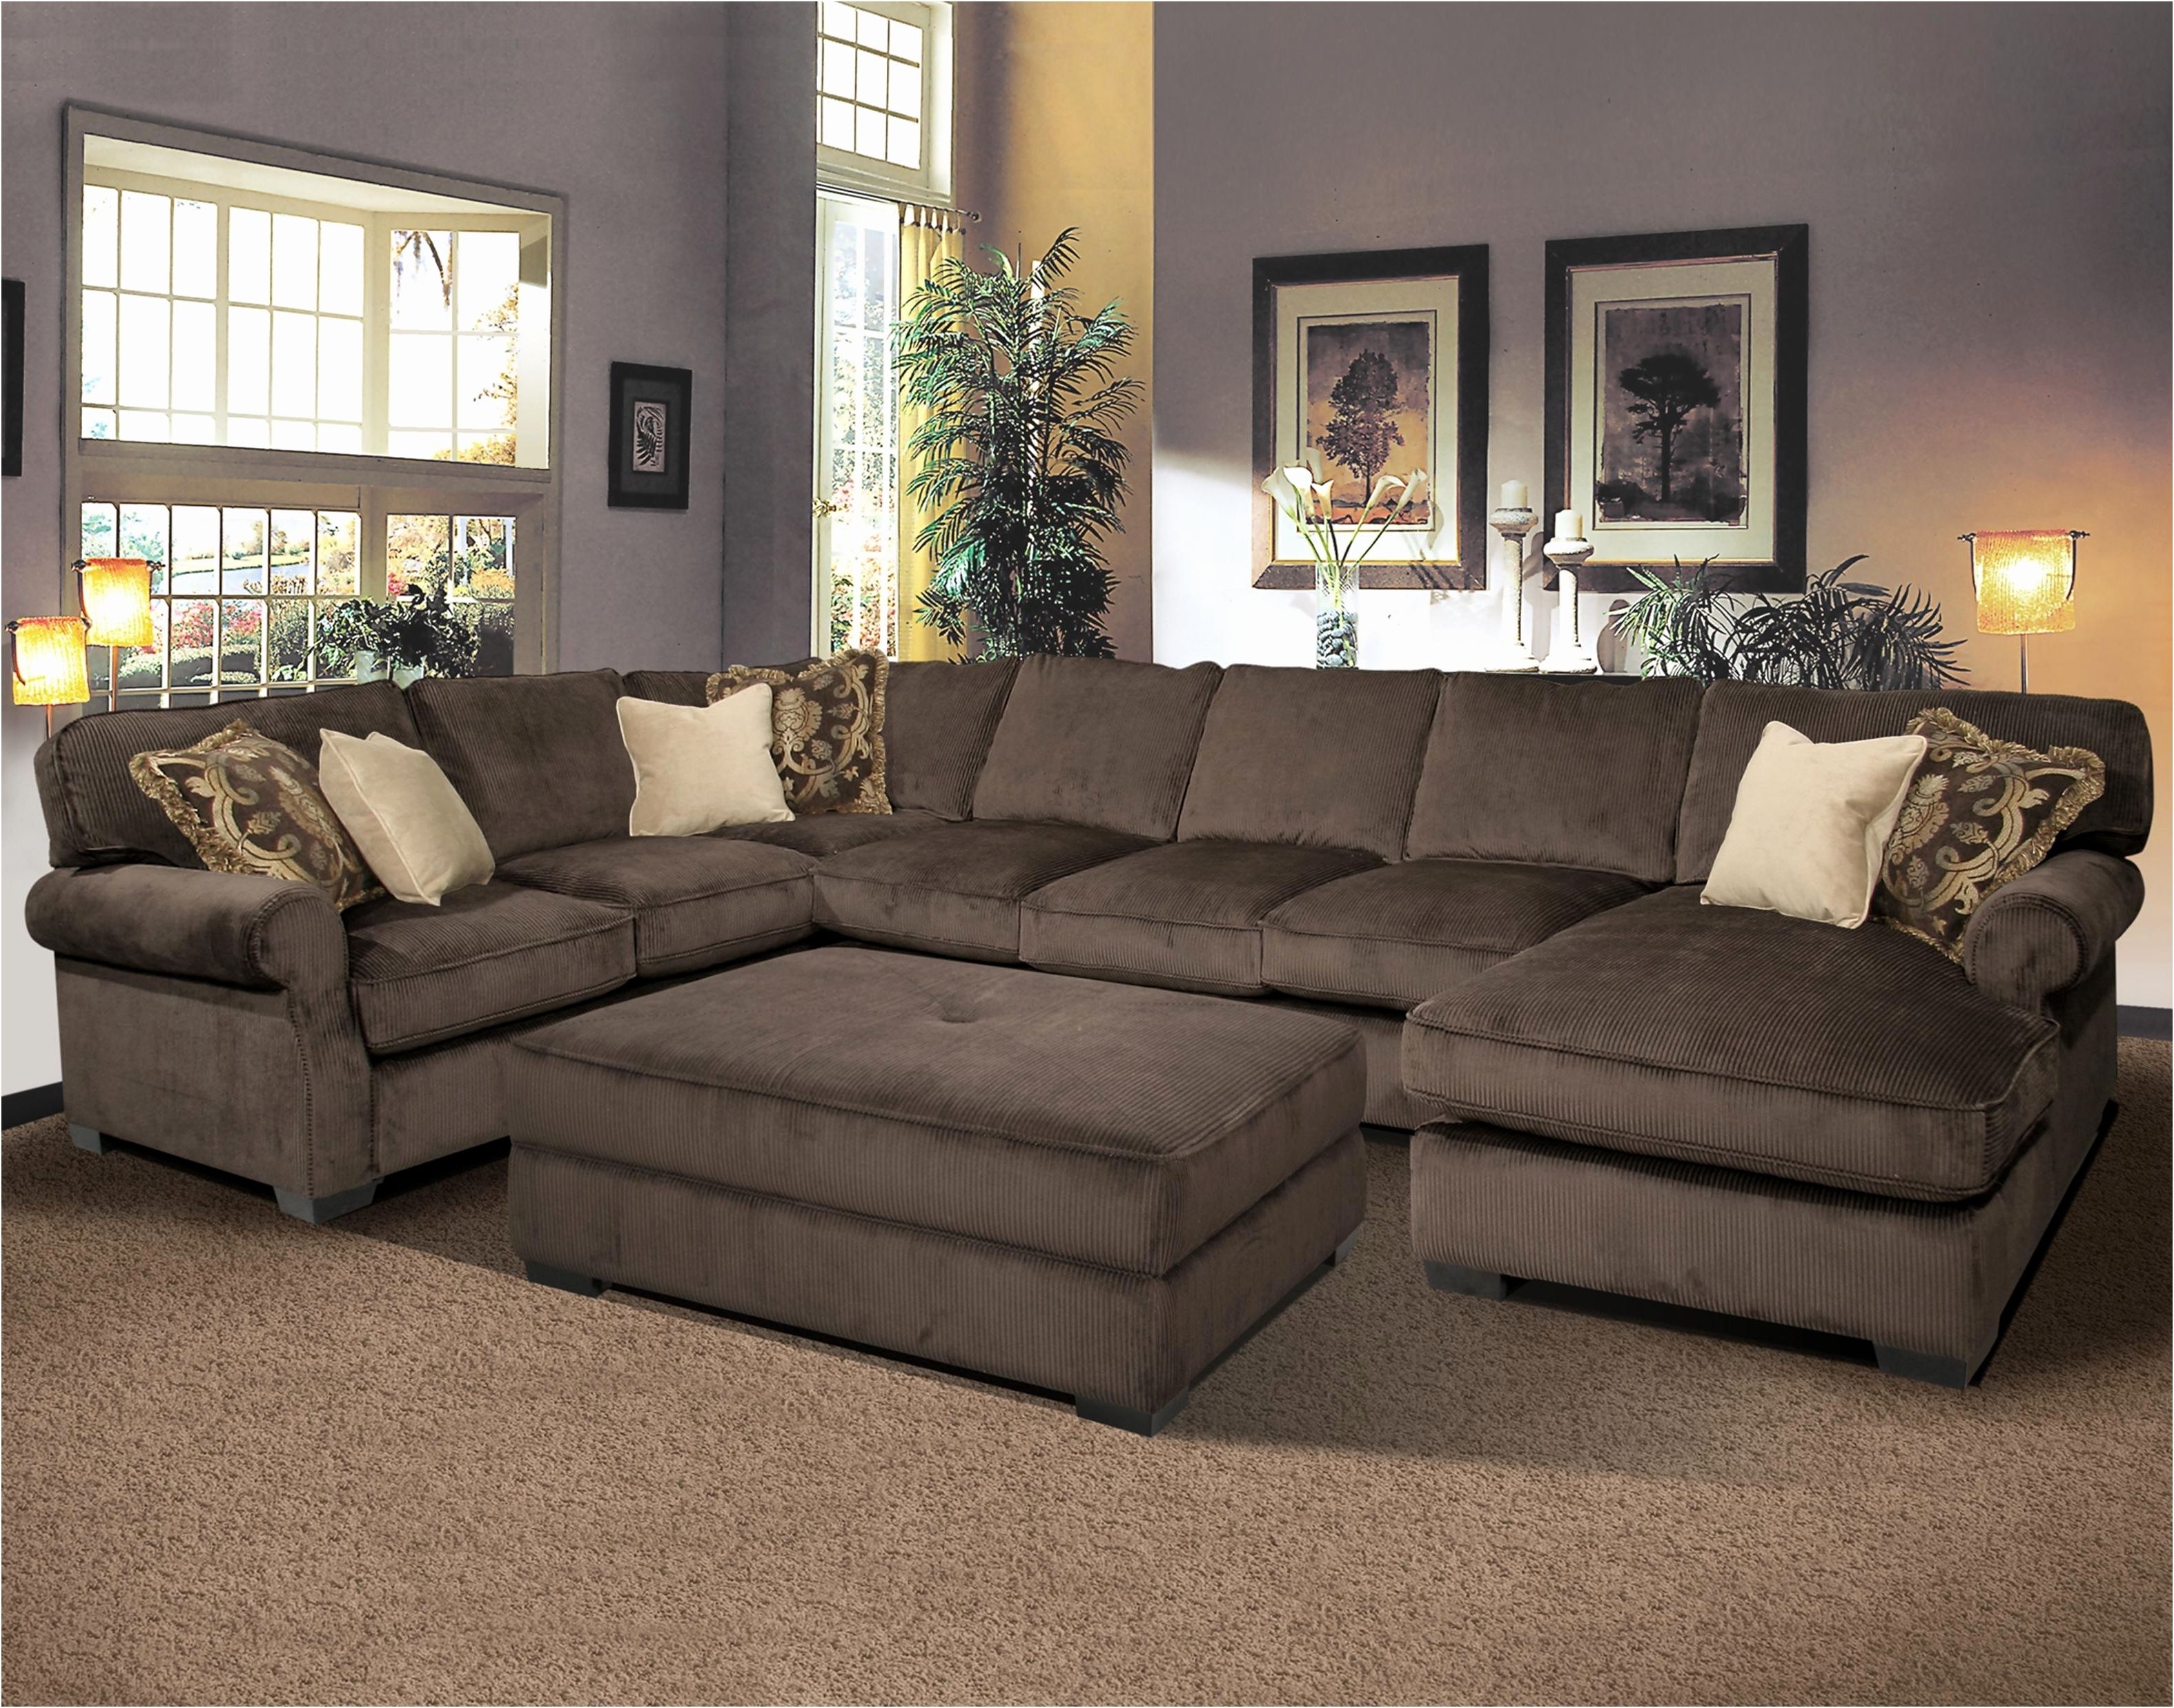 Sectional Sofa Beds Ottawa With Storage Ikea Leather Vancouver For With Regard To Ottawa Sale Sectional Sofas (View 6 of 10)